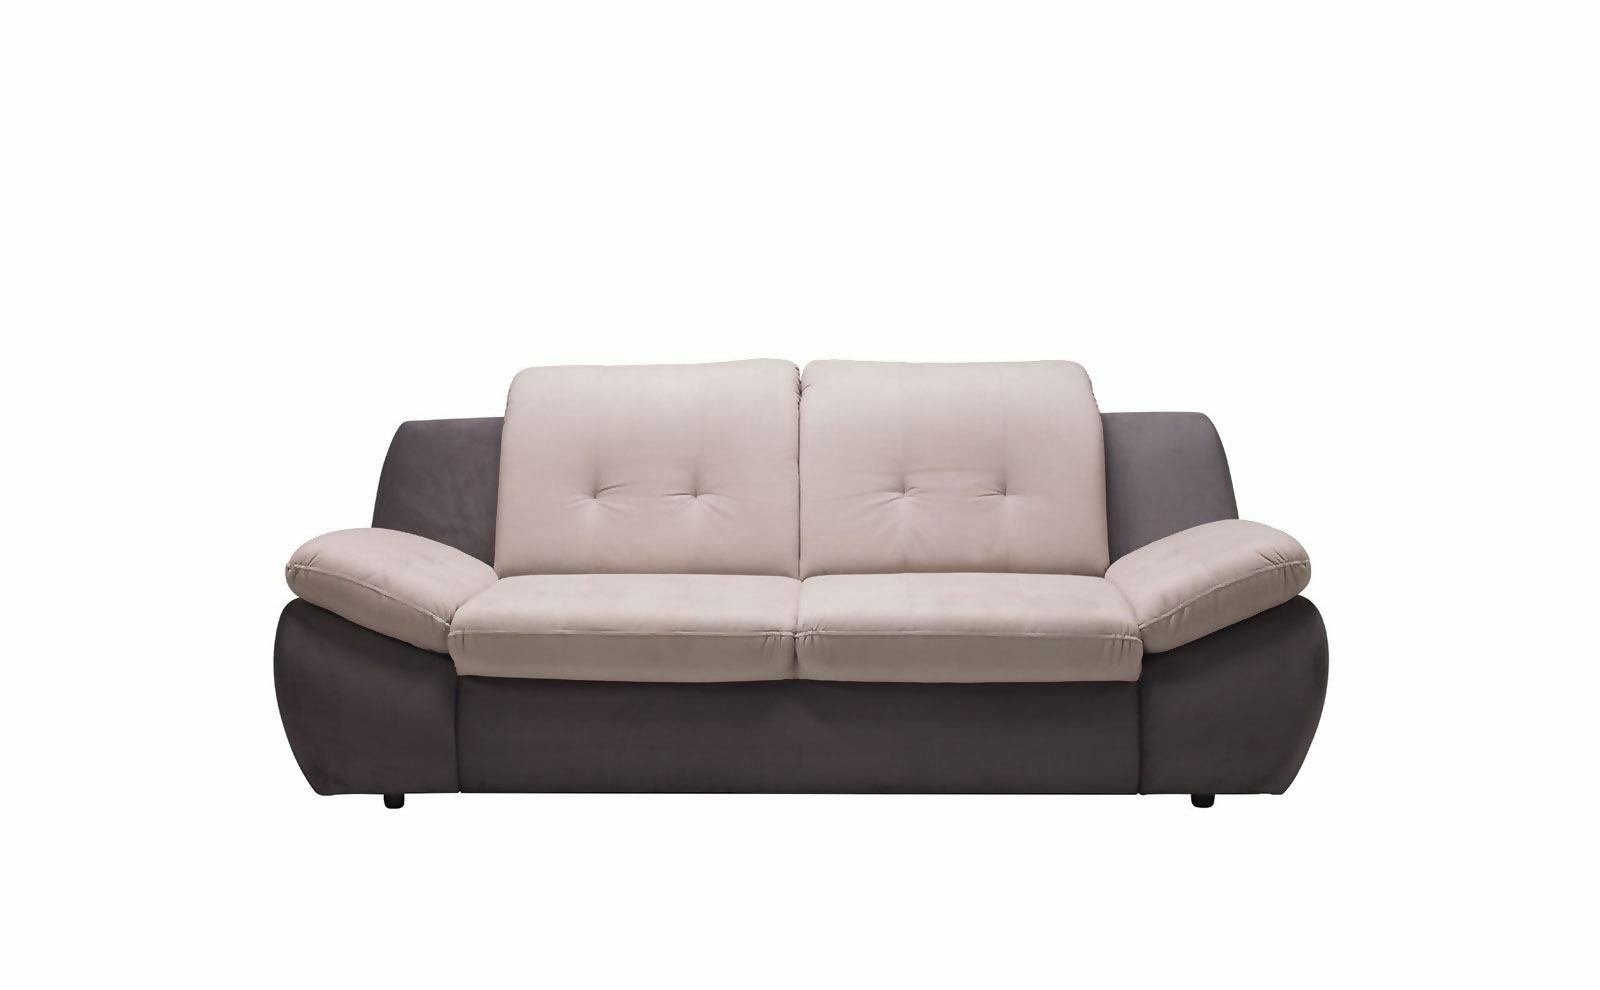 Europe 3 Lounge Couch, Made Club Sofa Sitzer Relax Polster JVmoebel Designer Sofa in Sofas Textil